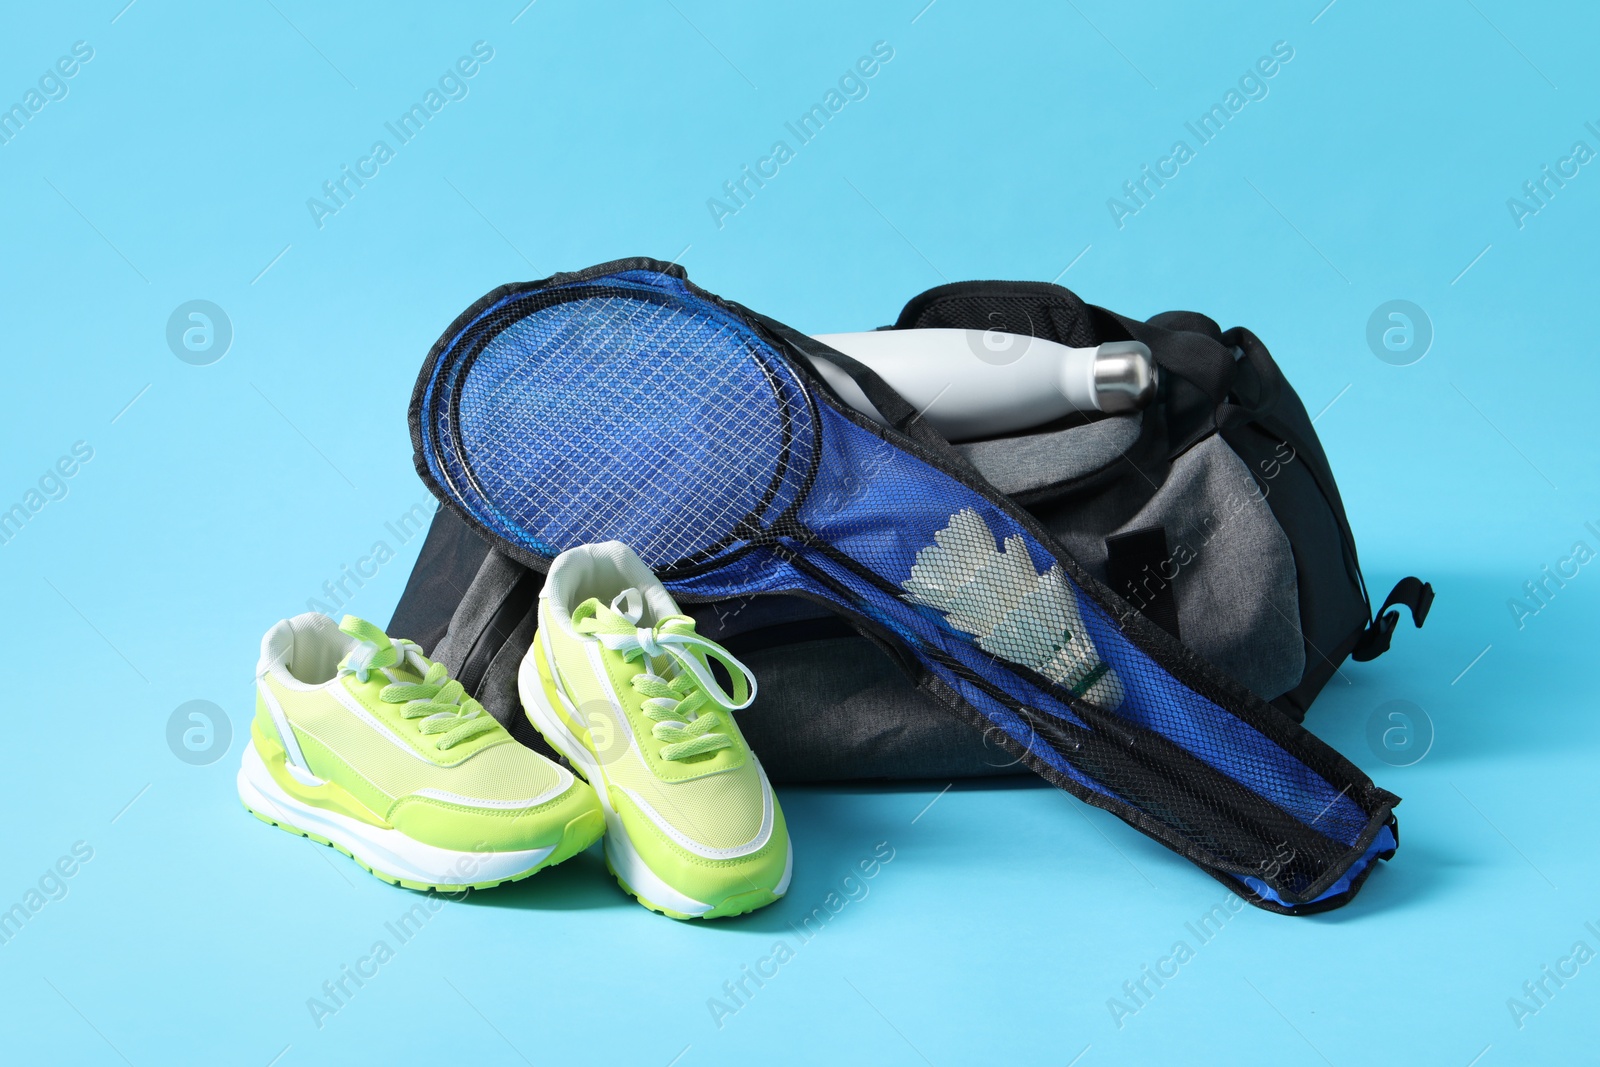 Photo of Badminton set, bag, sneakers and bottle on light blue background